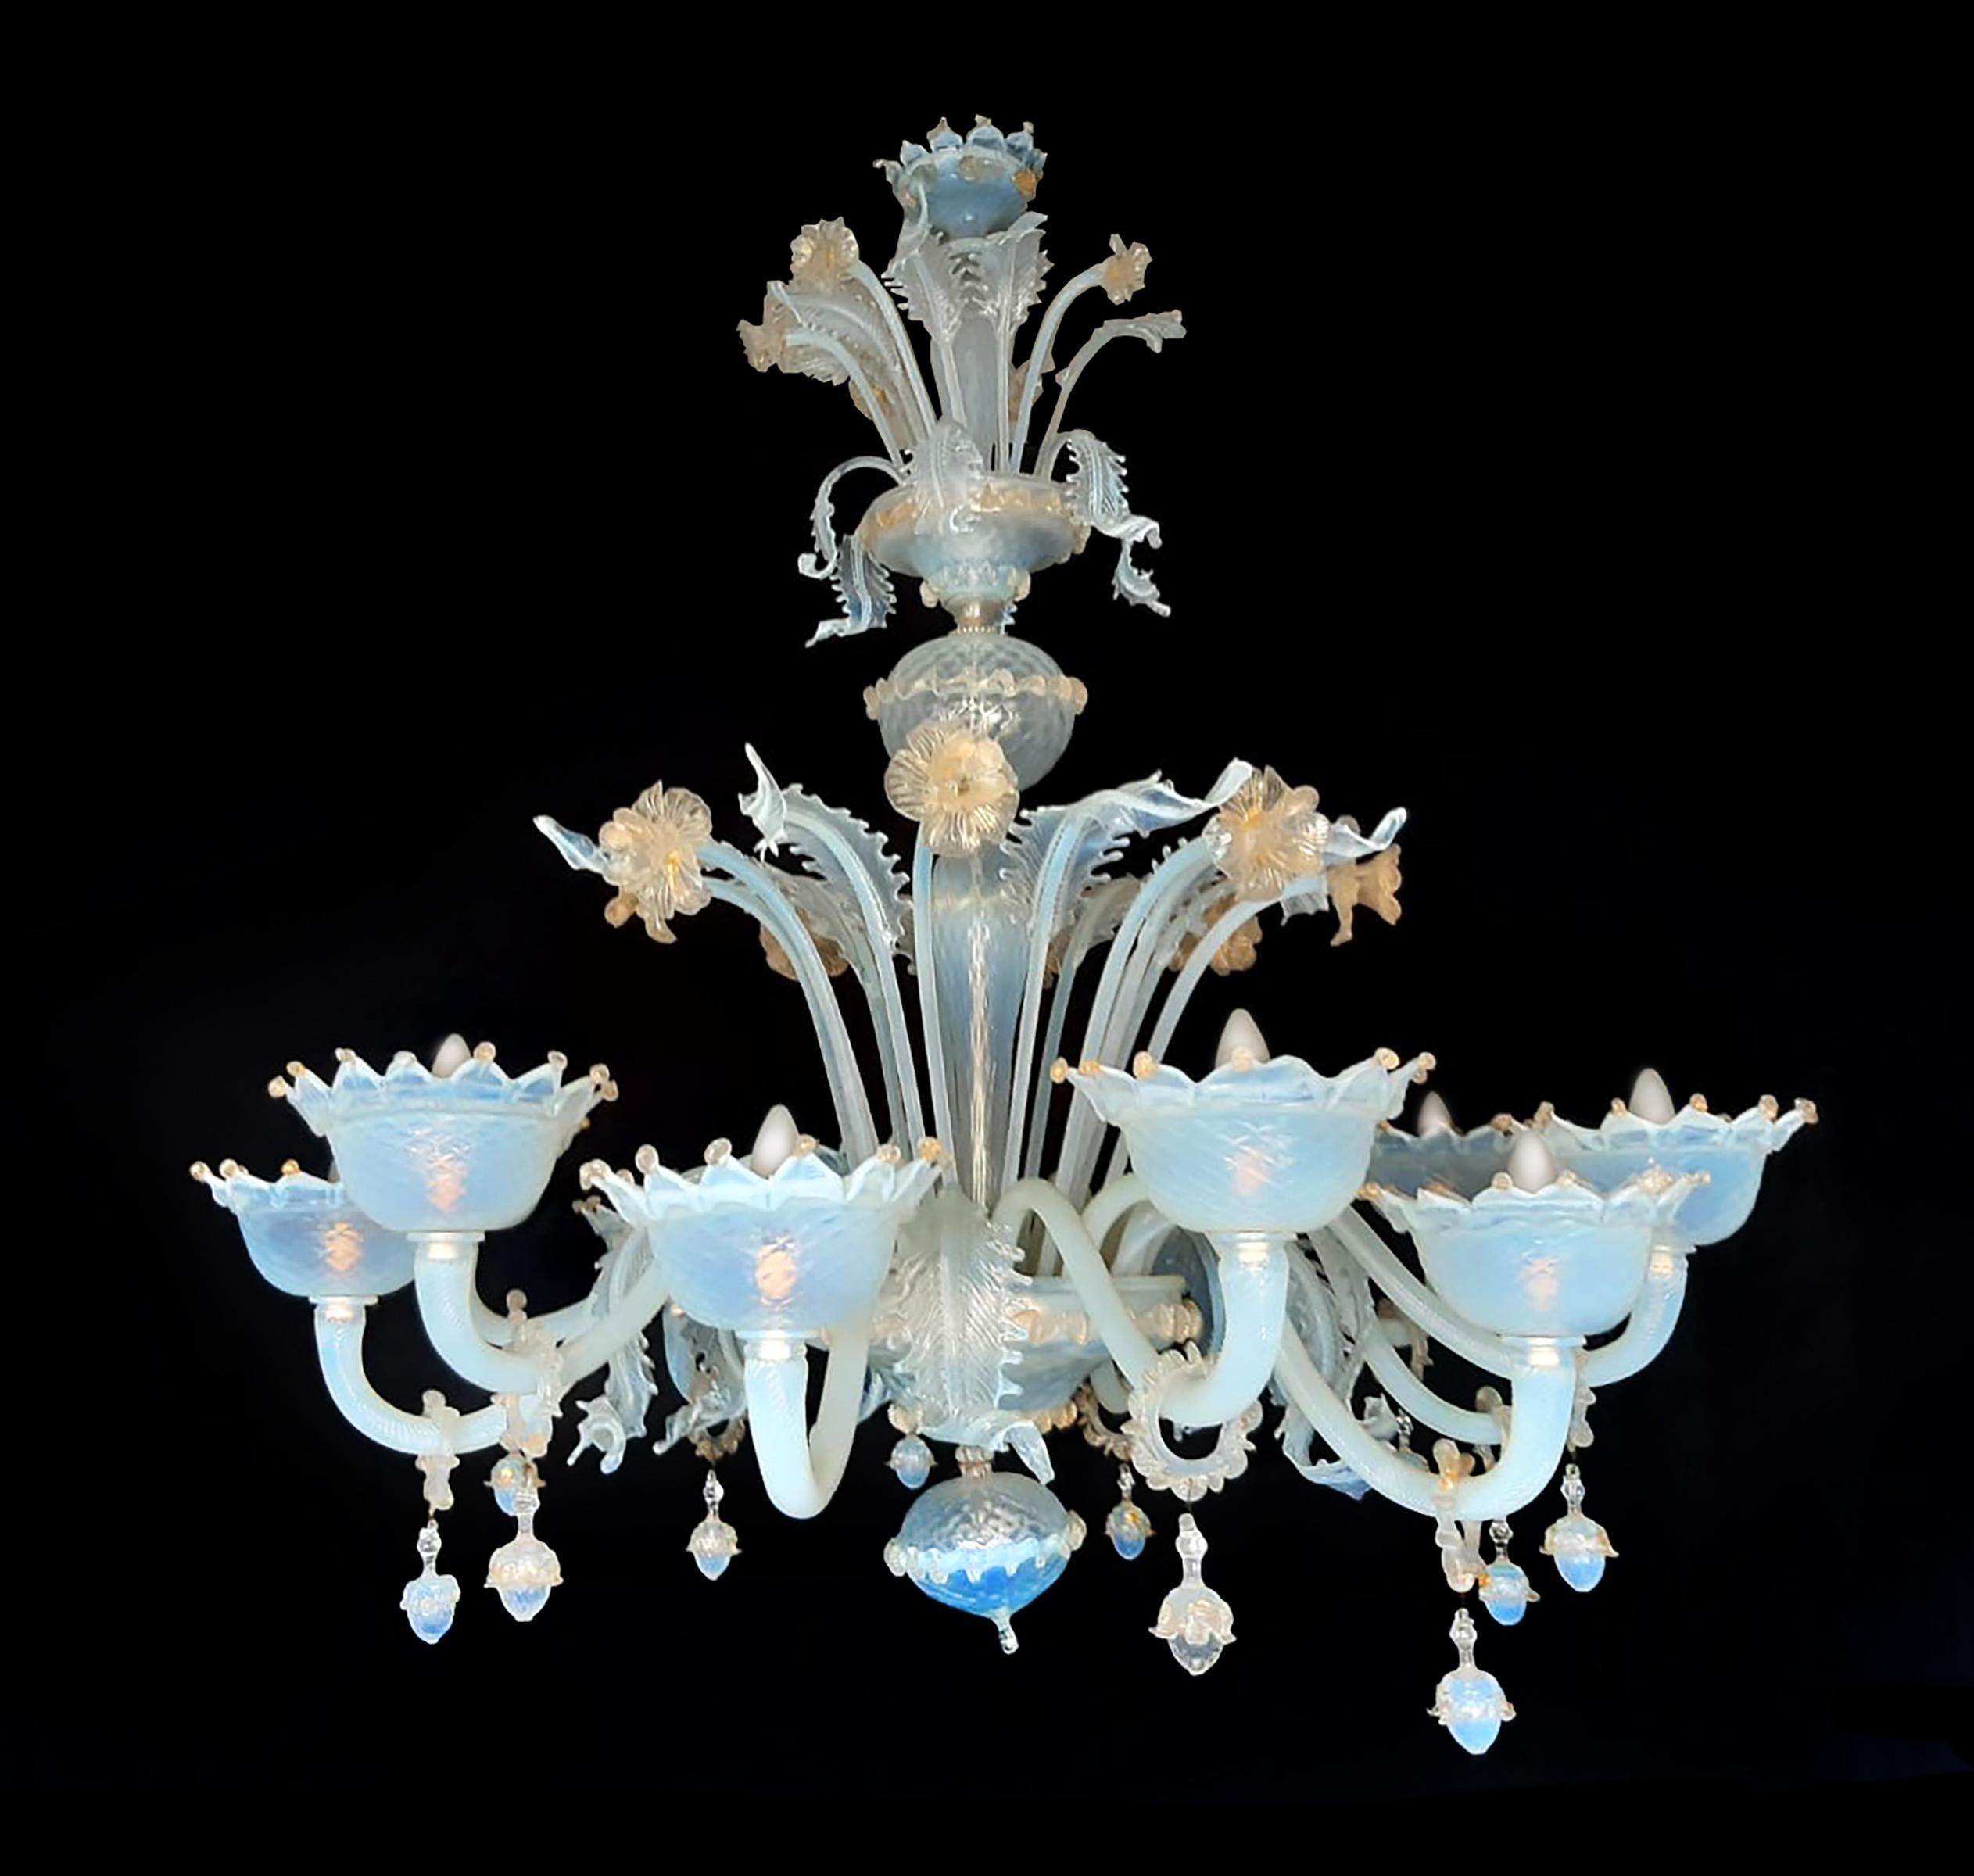 Murano chandelier of awesome beauty. Lights (12) flowers and leaves.